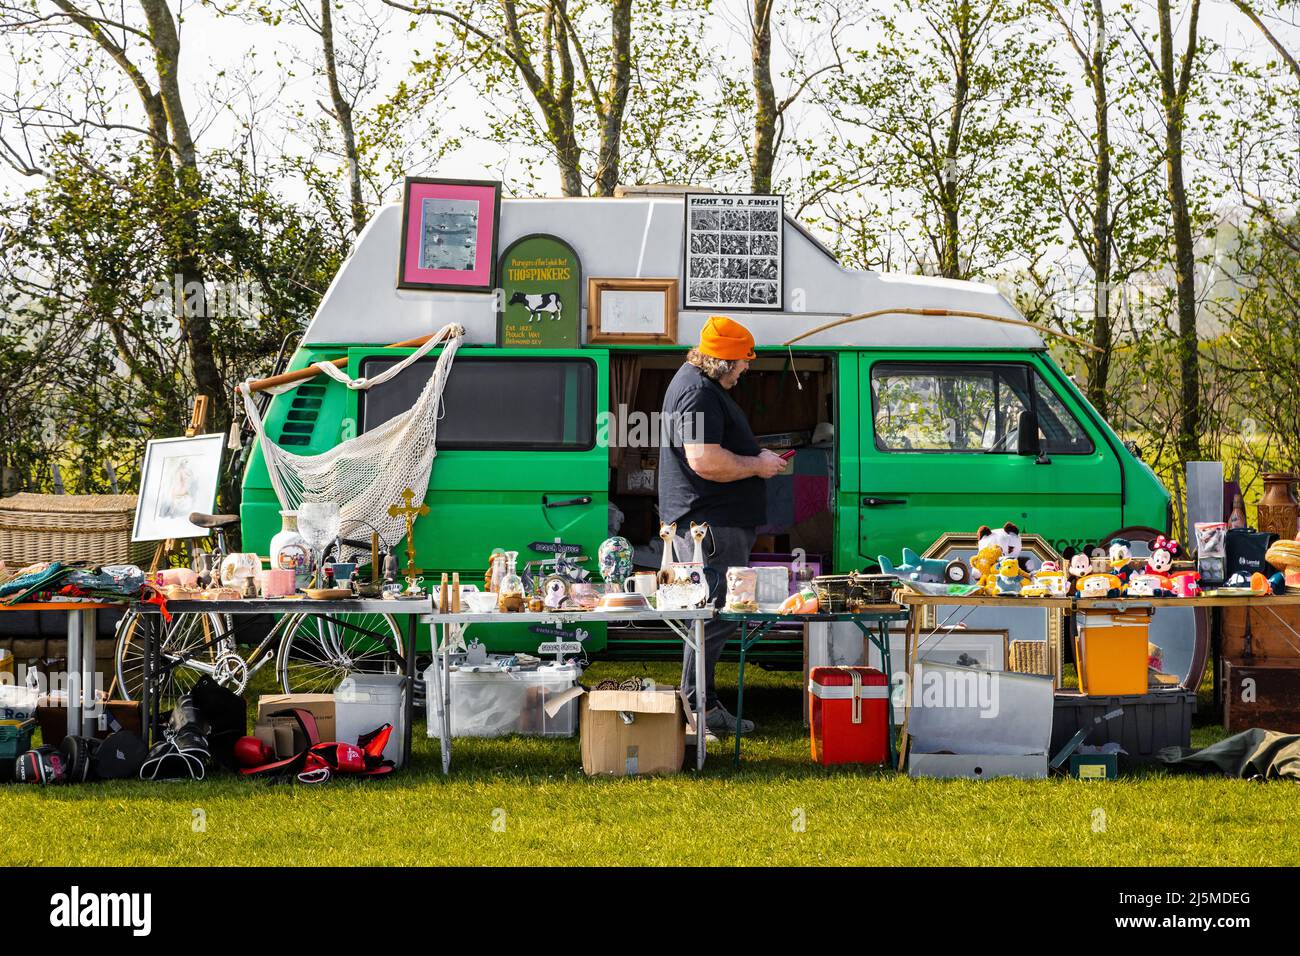 Saturday car boot sale, this stall holder all set up and ready for business  offering a large selection of secondhand items ,curios, glassware. Stock Photo